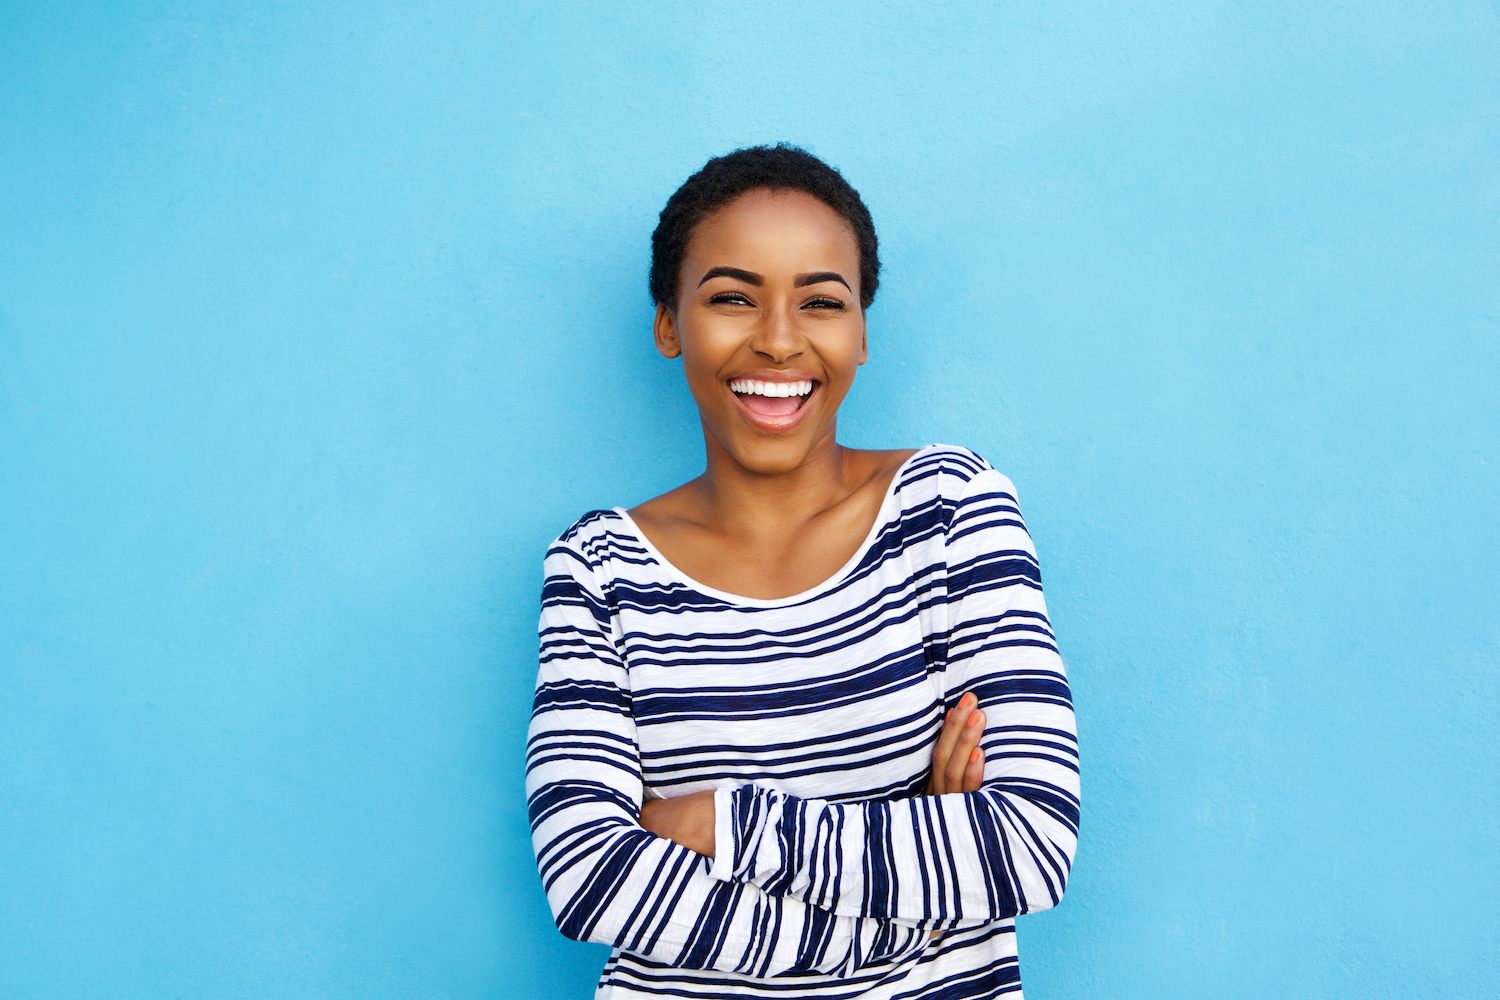 Black woman in a striped shirt smiles against a blue background after tooth bonding